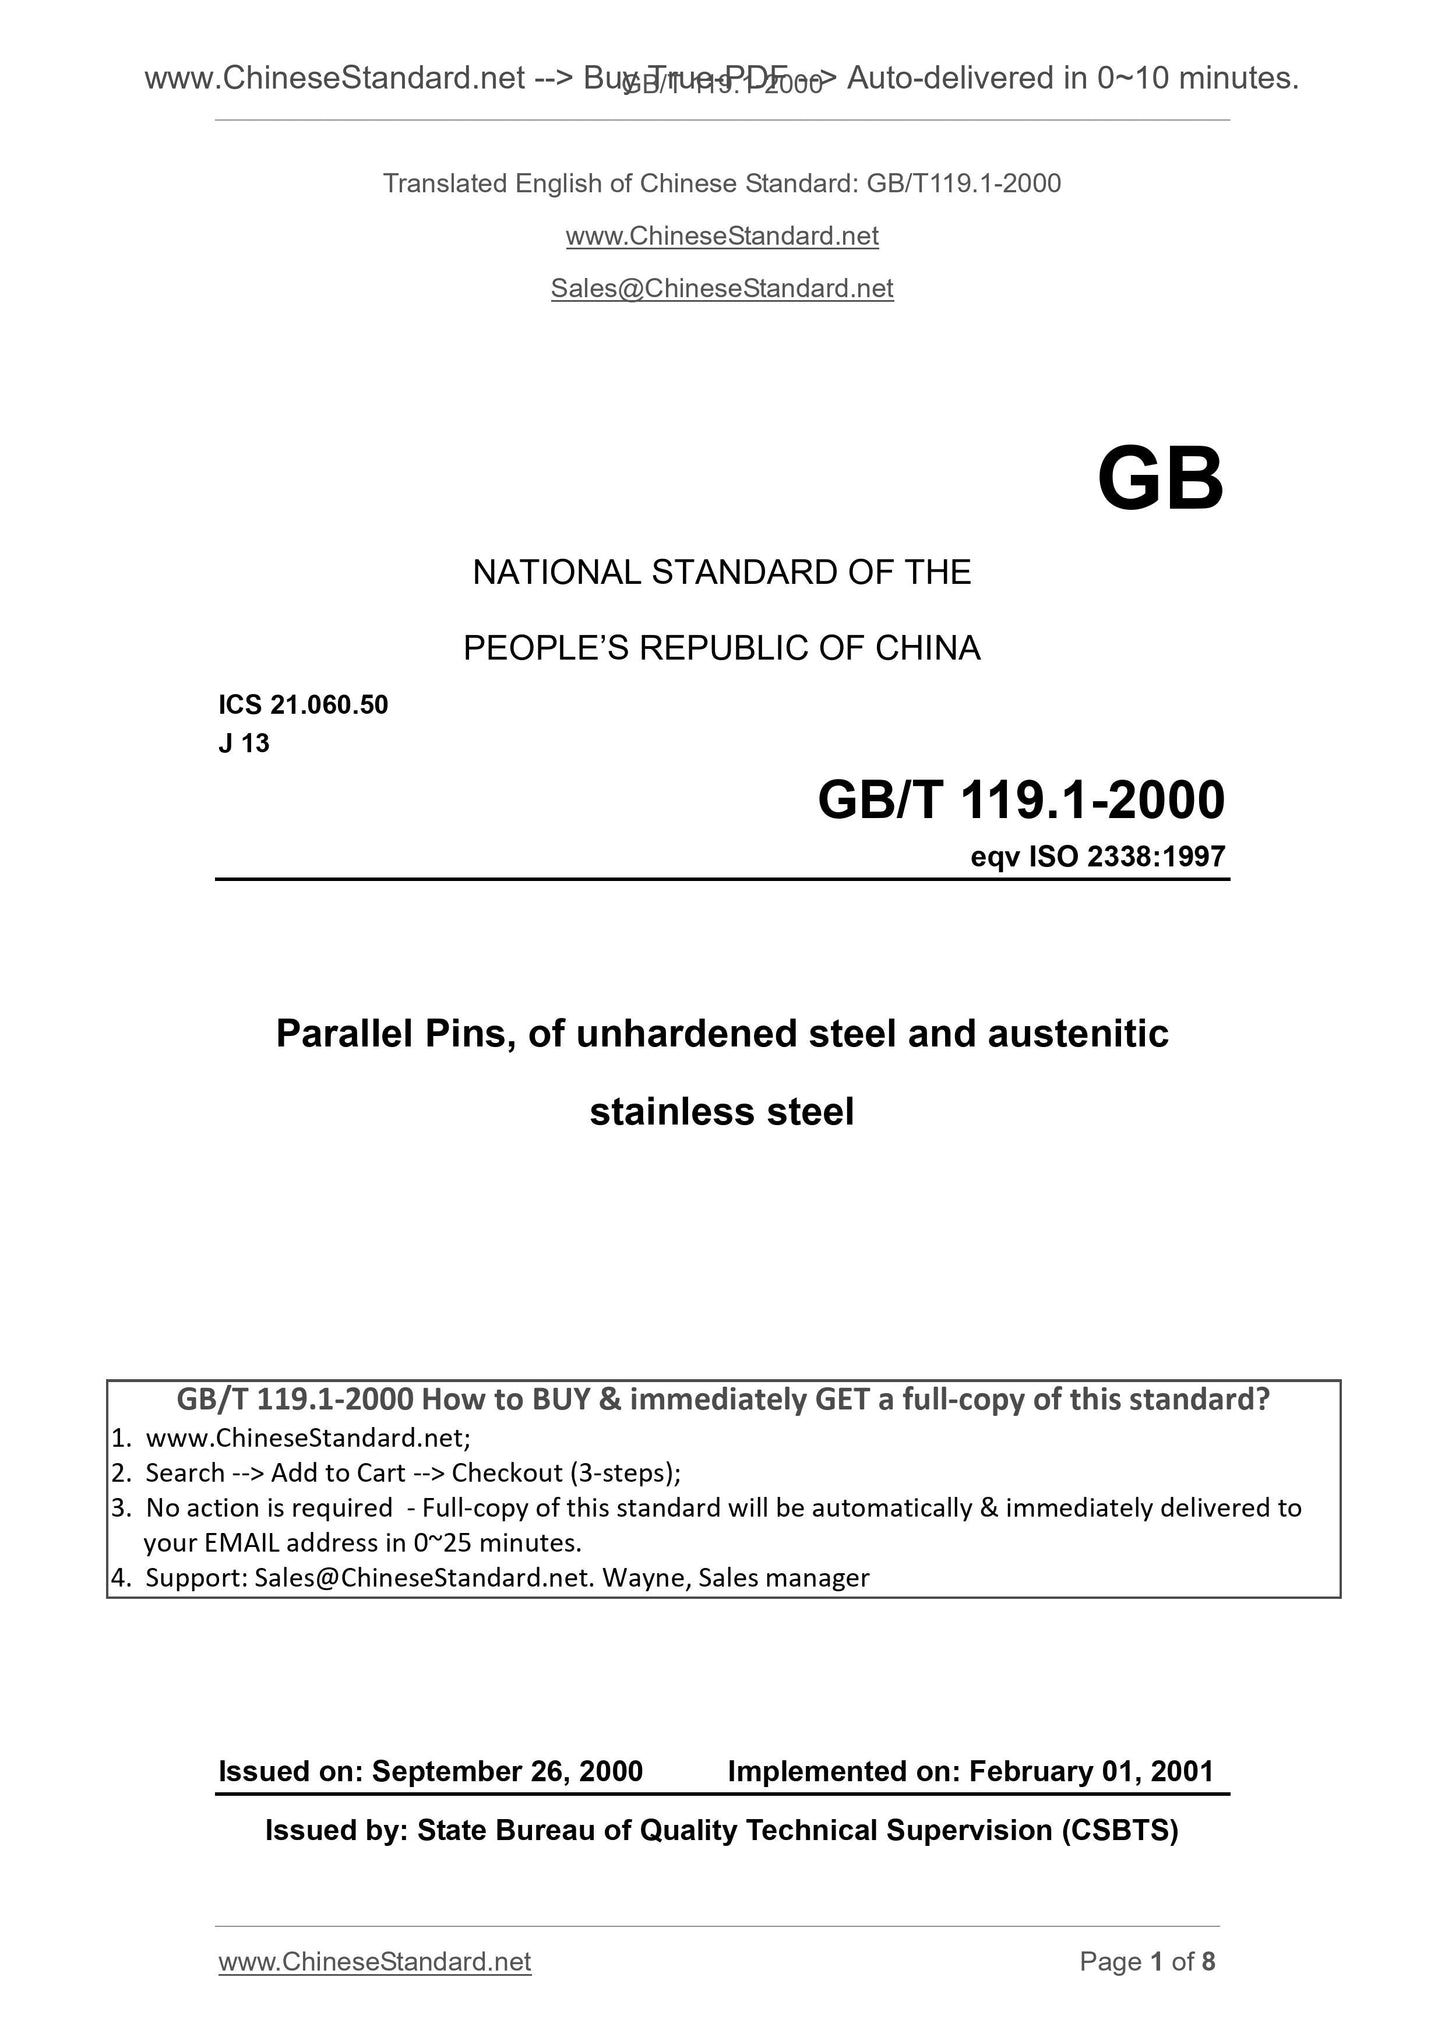 GB/T 119.1-2000 Page 1